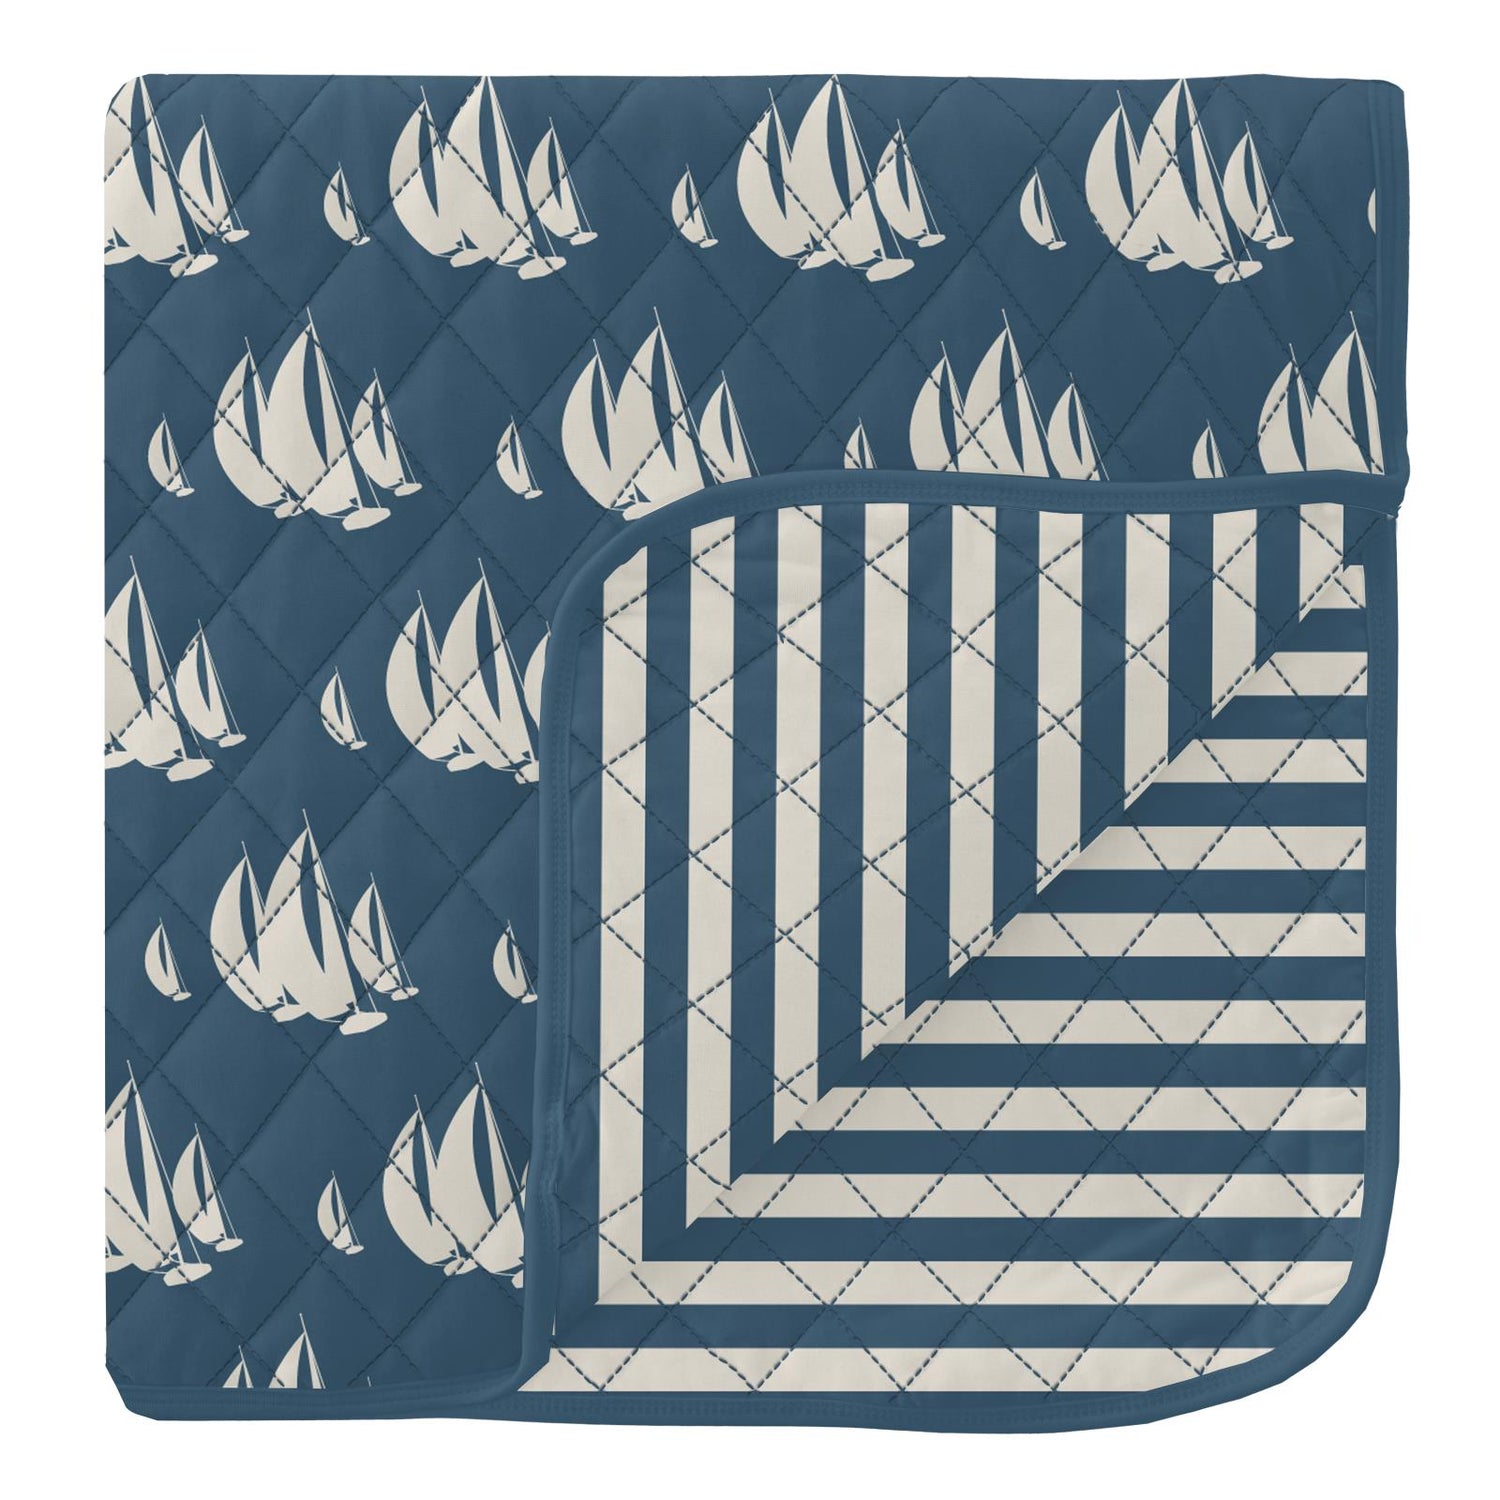 Print Quilted Toddler Blanket in Deep Sea Sailboat Race/Nautical Stripe